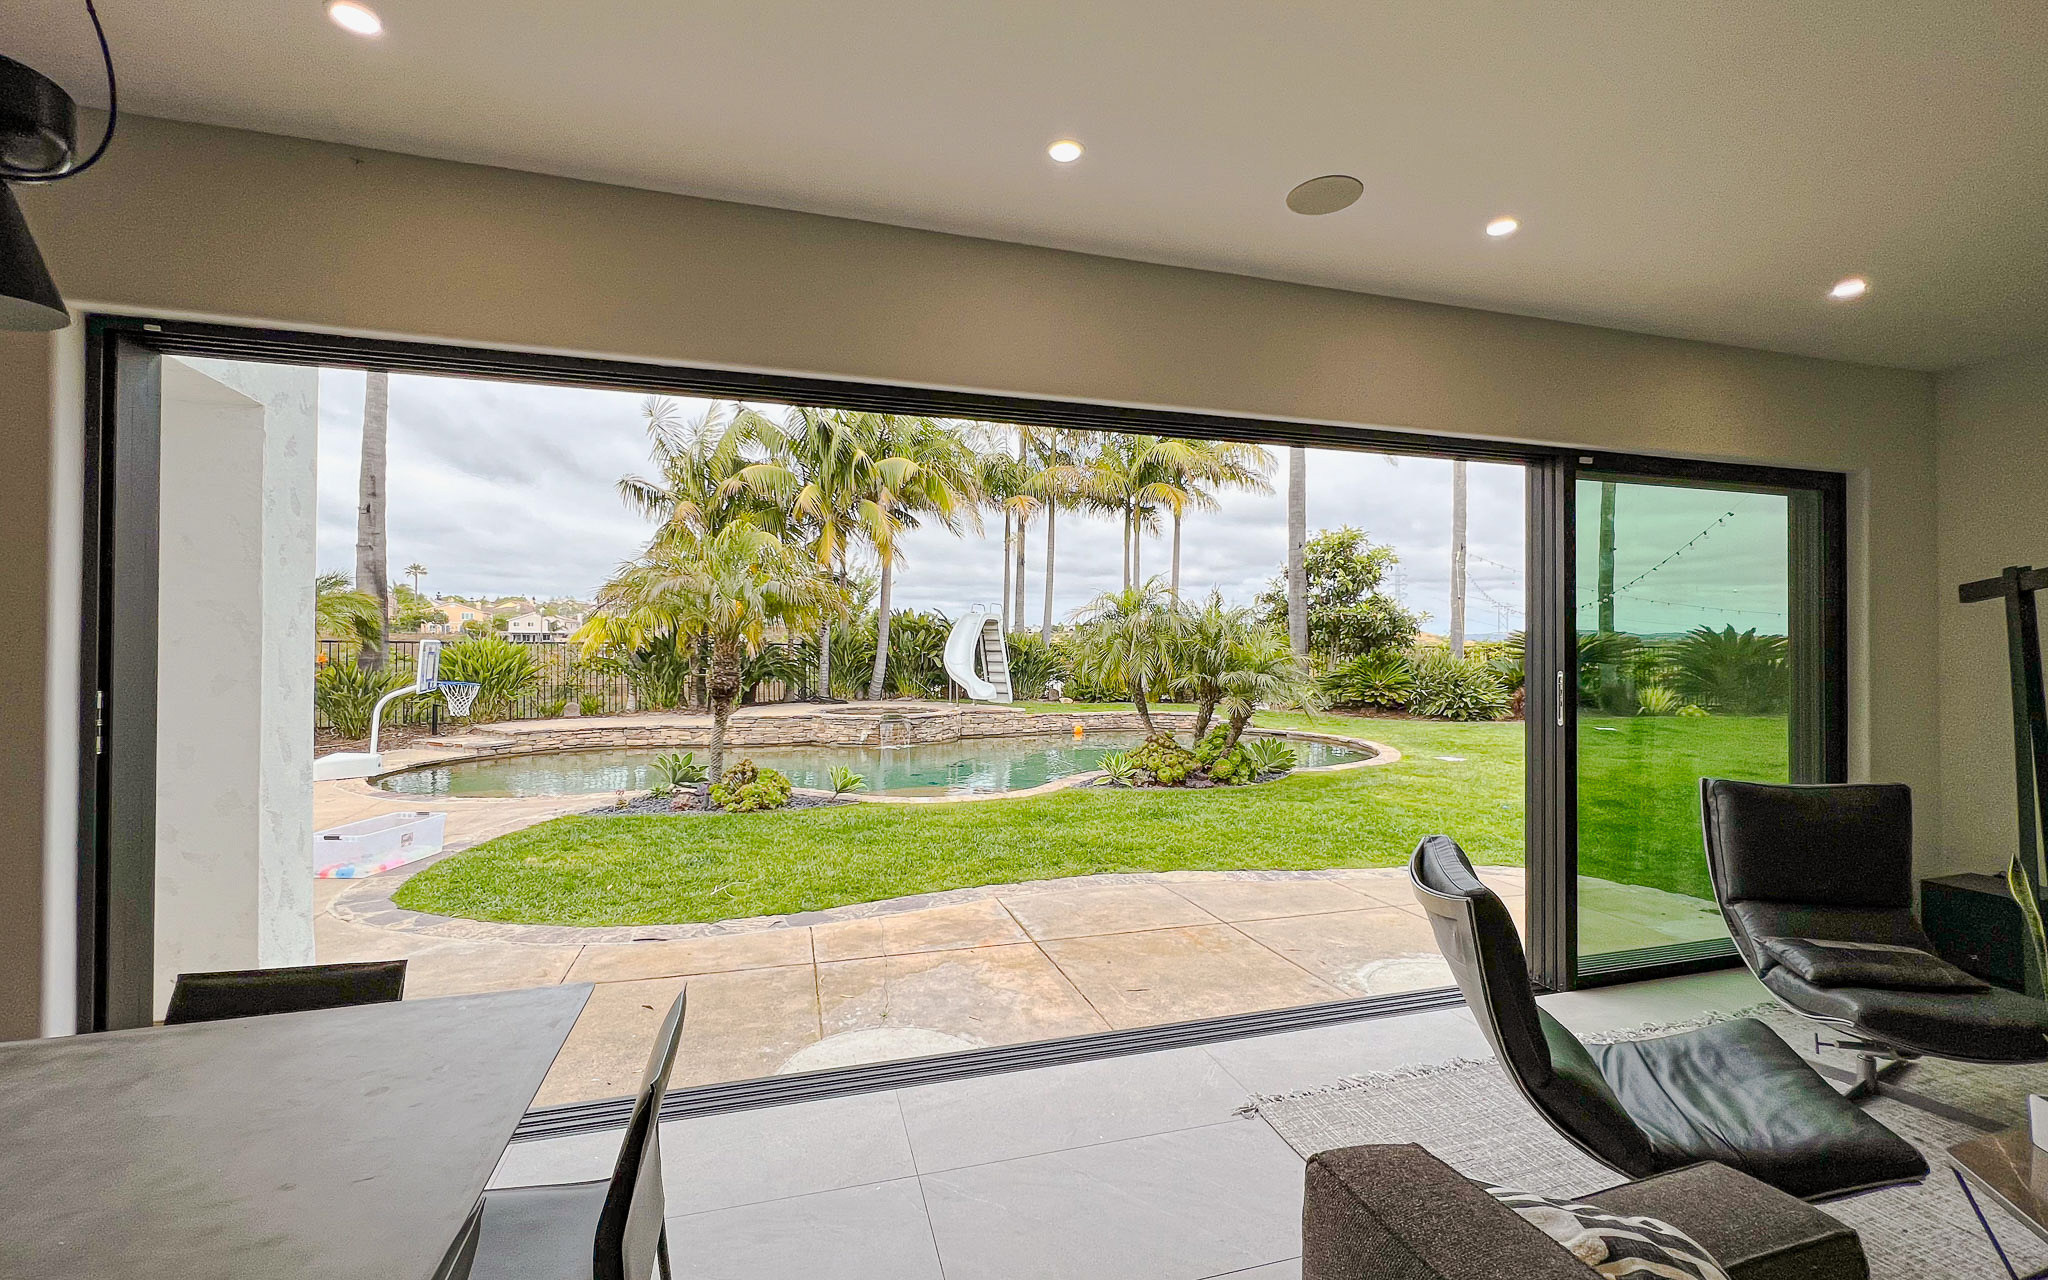 Modern living room with large sliding glass door overlooking a backyard with a swimming pool and tropical landscaping.